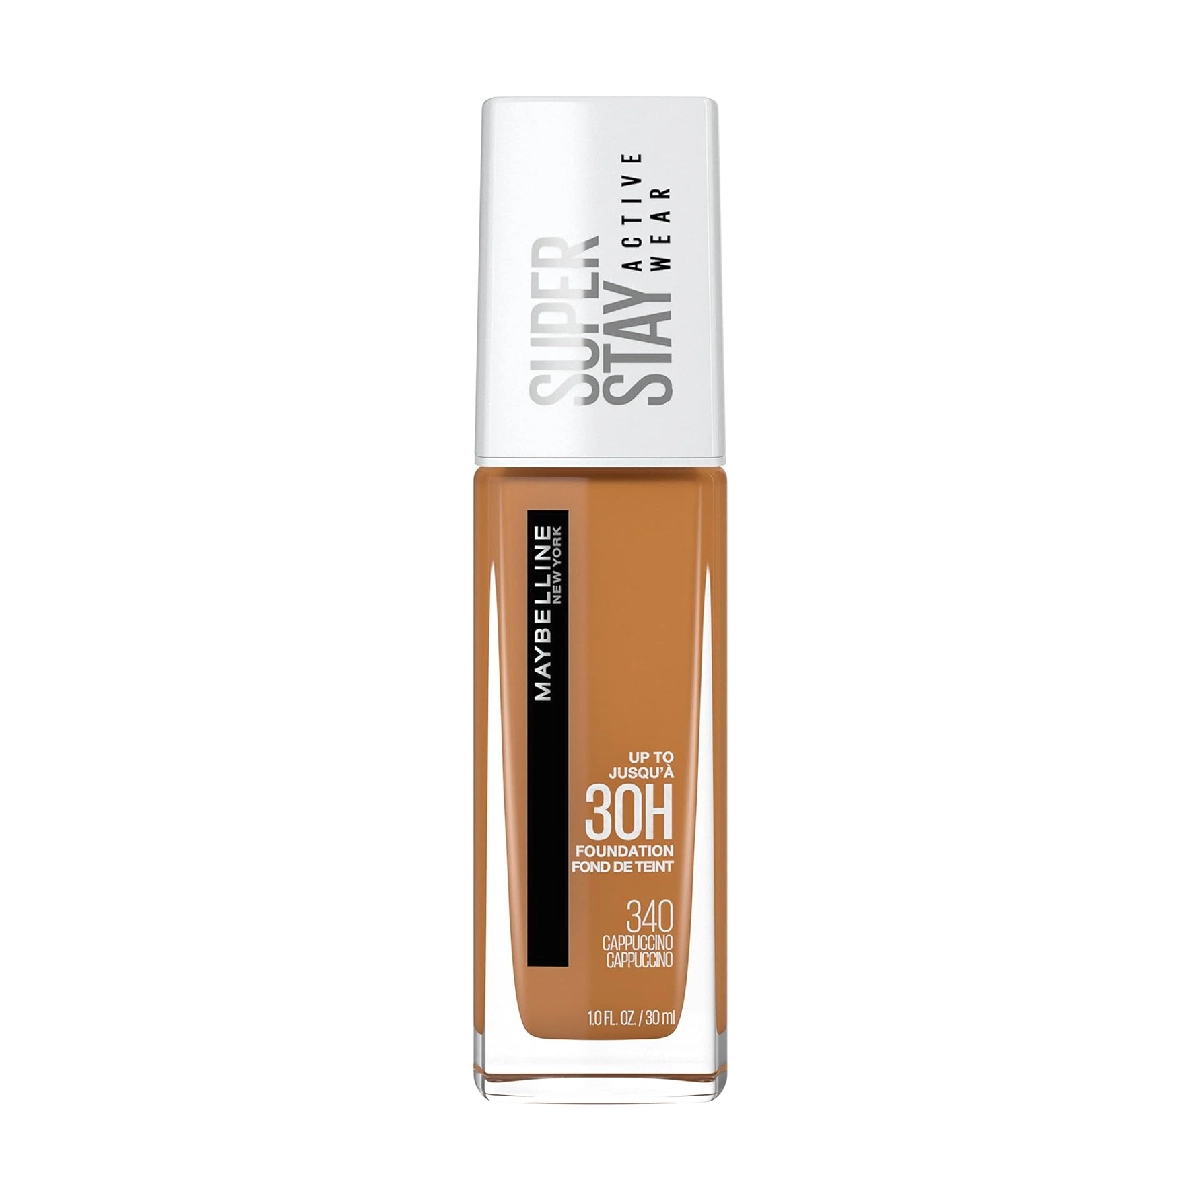 Maybelline Super Stay Full Coverage Liquid Foundation - foundation bottle against a white background